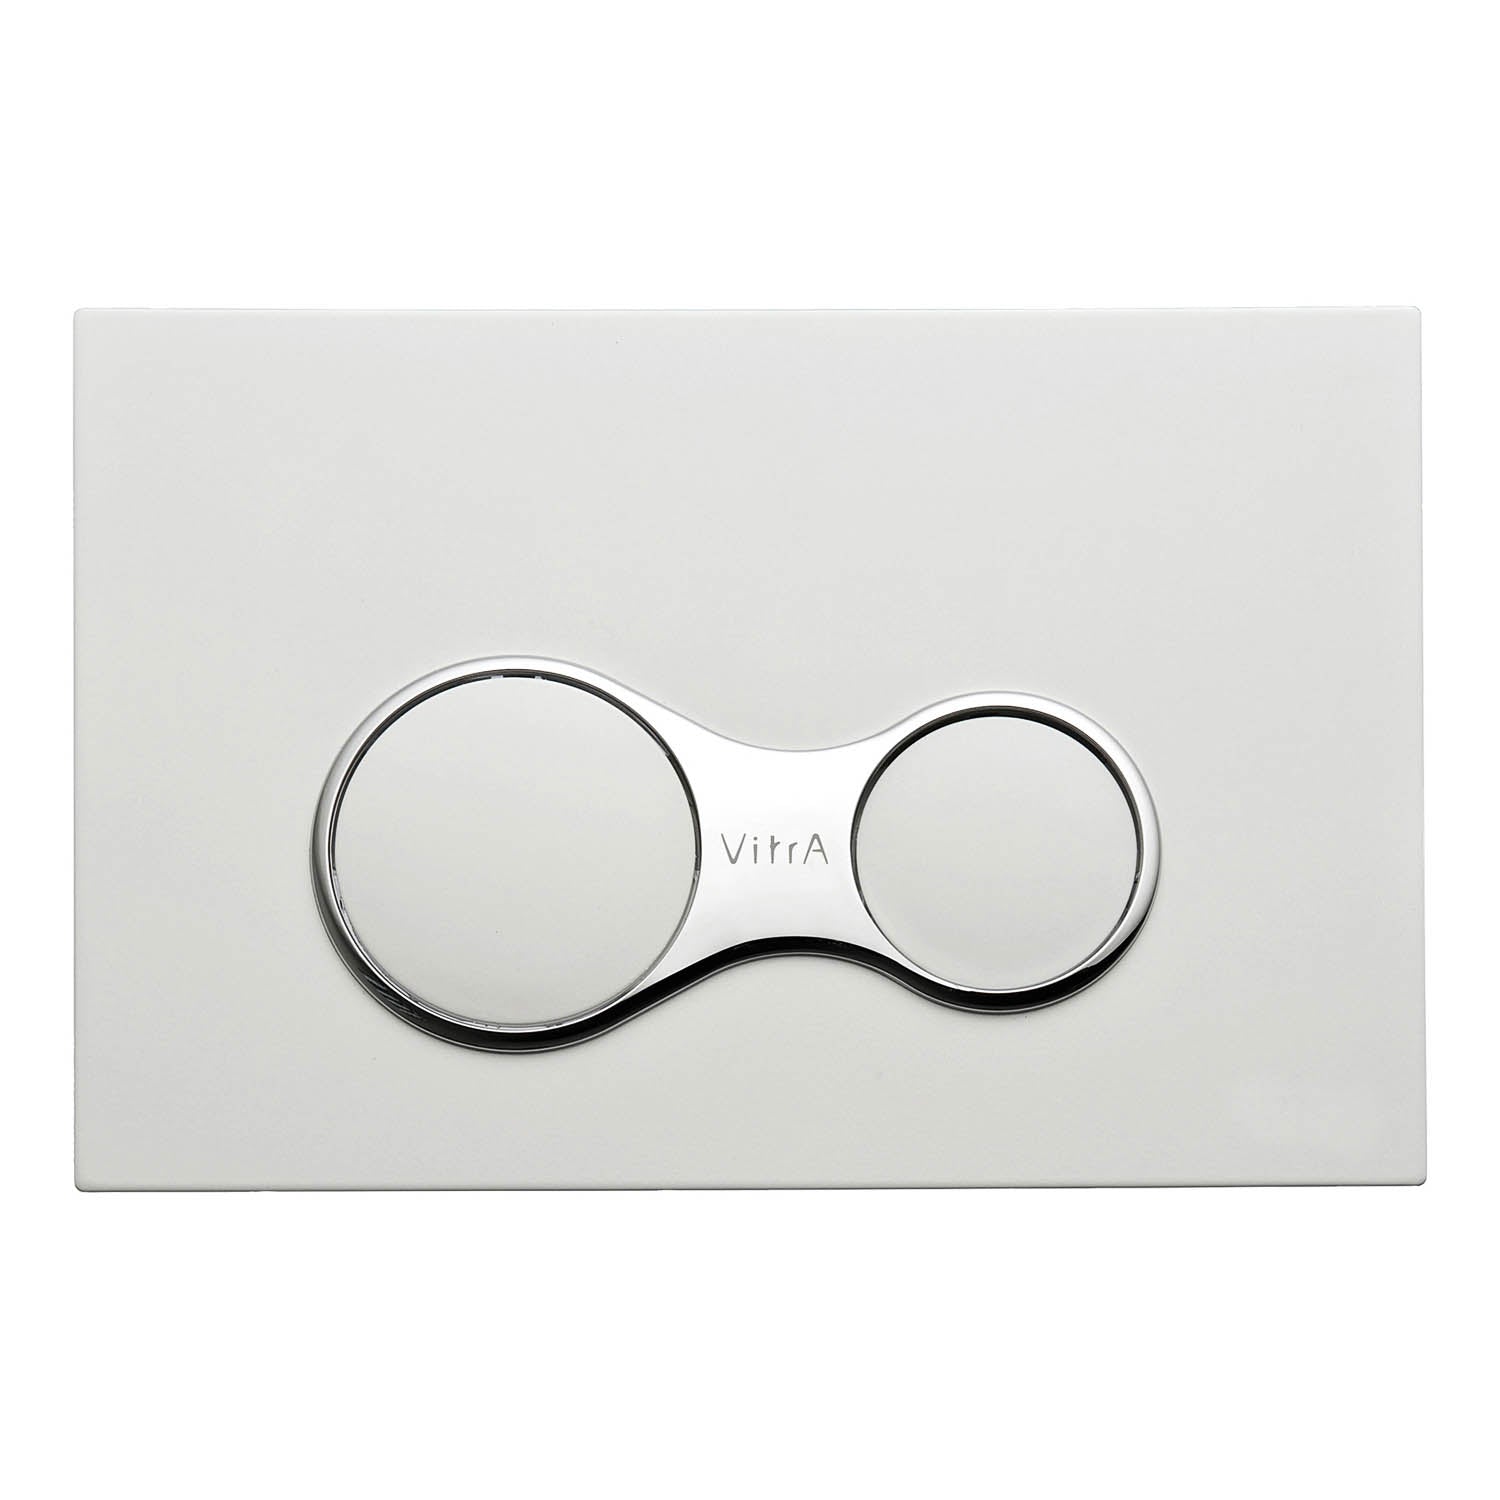 Sirius Dual Action Flush Plate with a white finish on a white background